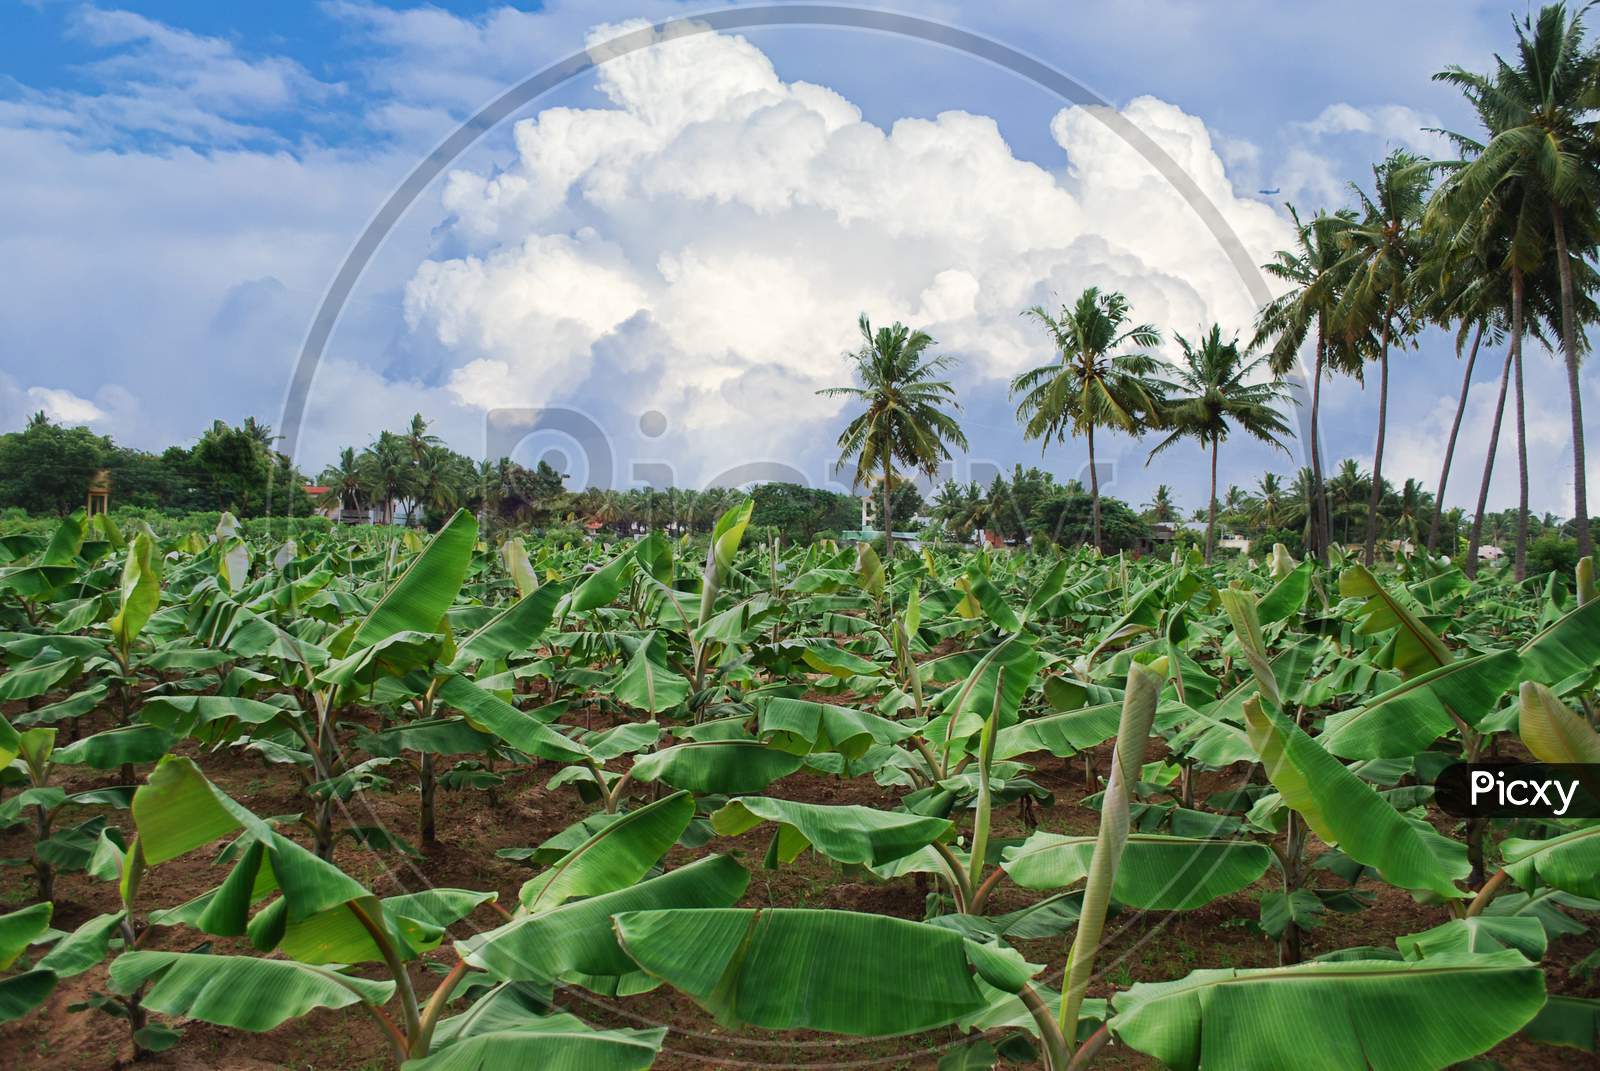 Young Banana Plants On A Clear Tropical Day In South India